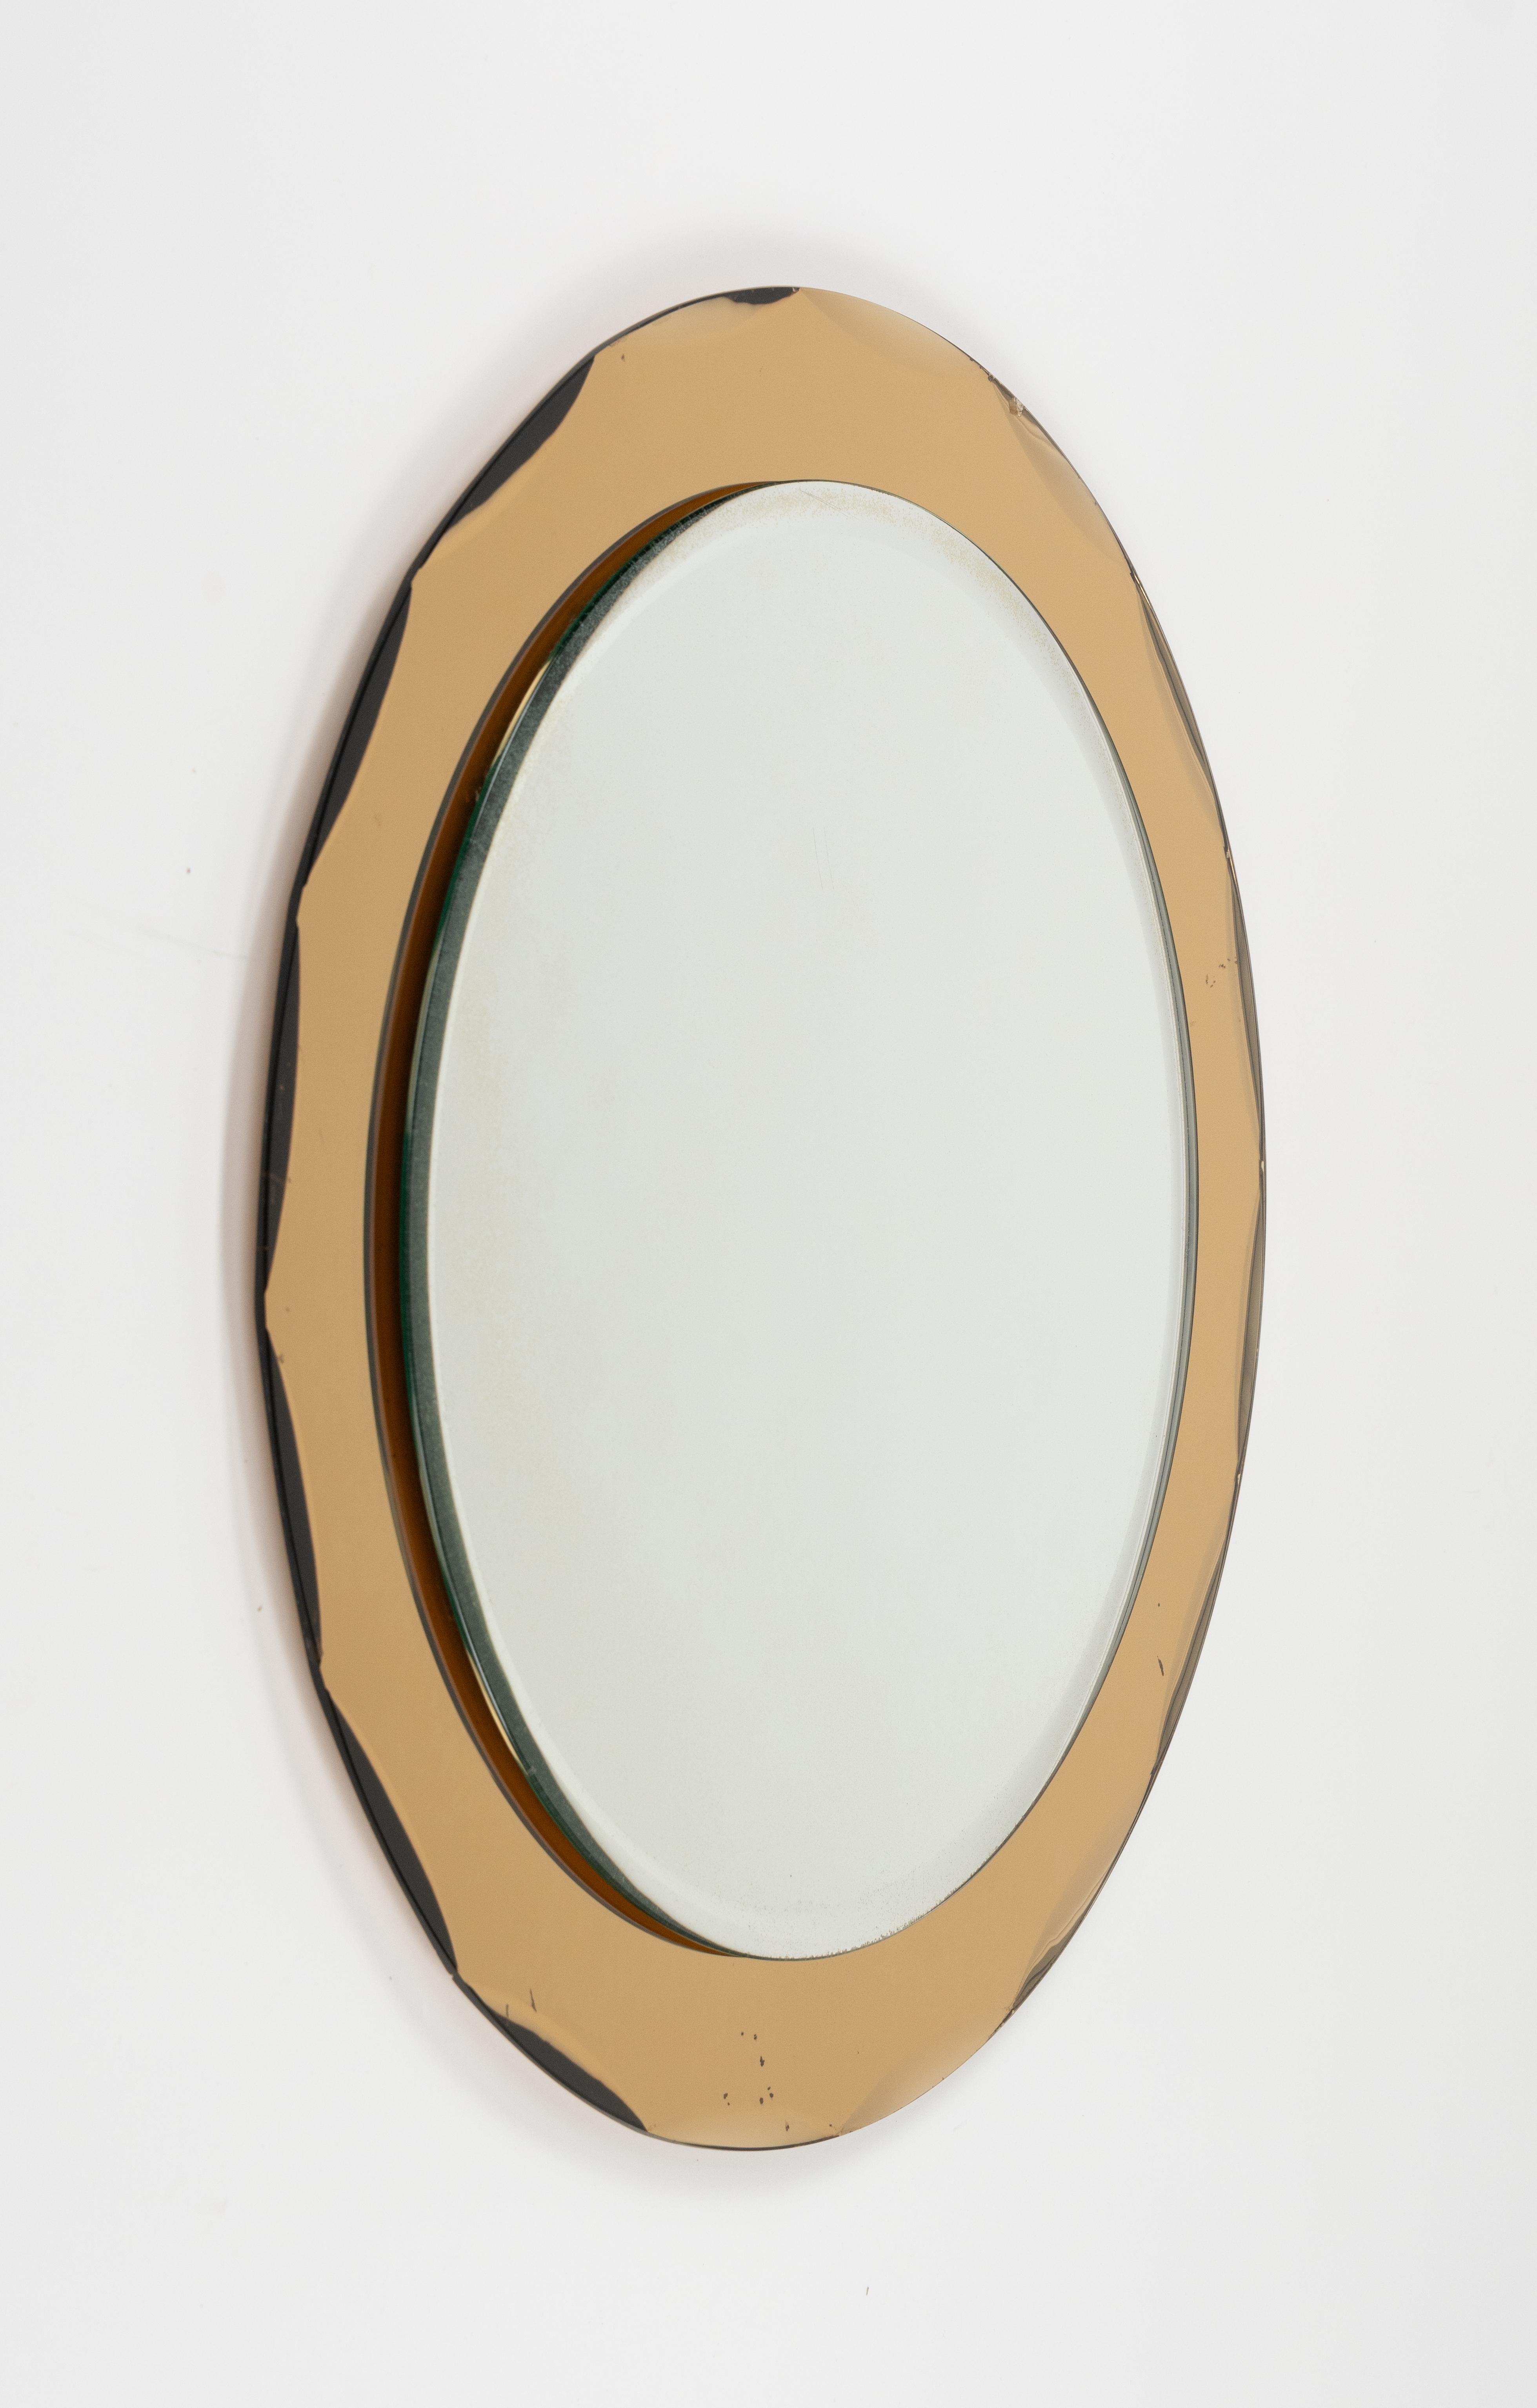 Glass Midcentury Round Yellow Wall Mirror by Metalvetro Galvorame, Italy 1970s For Sale